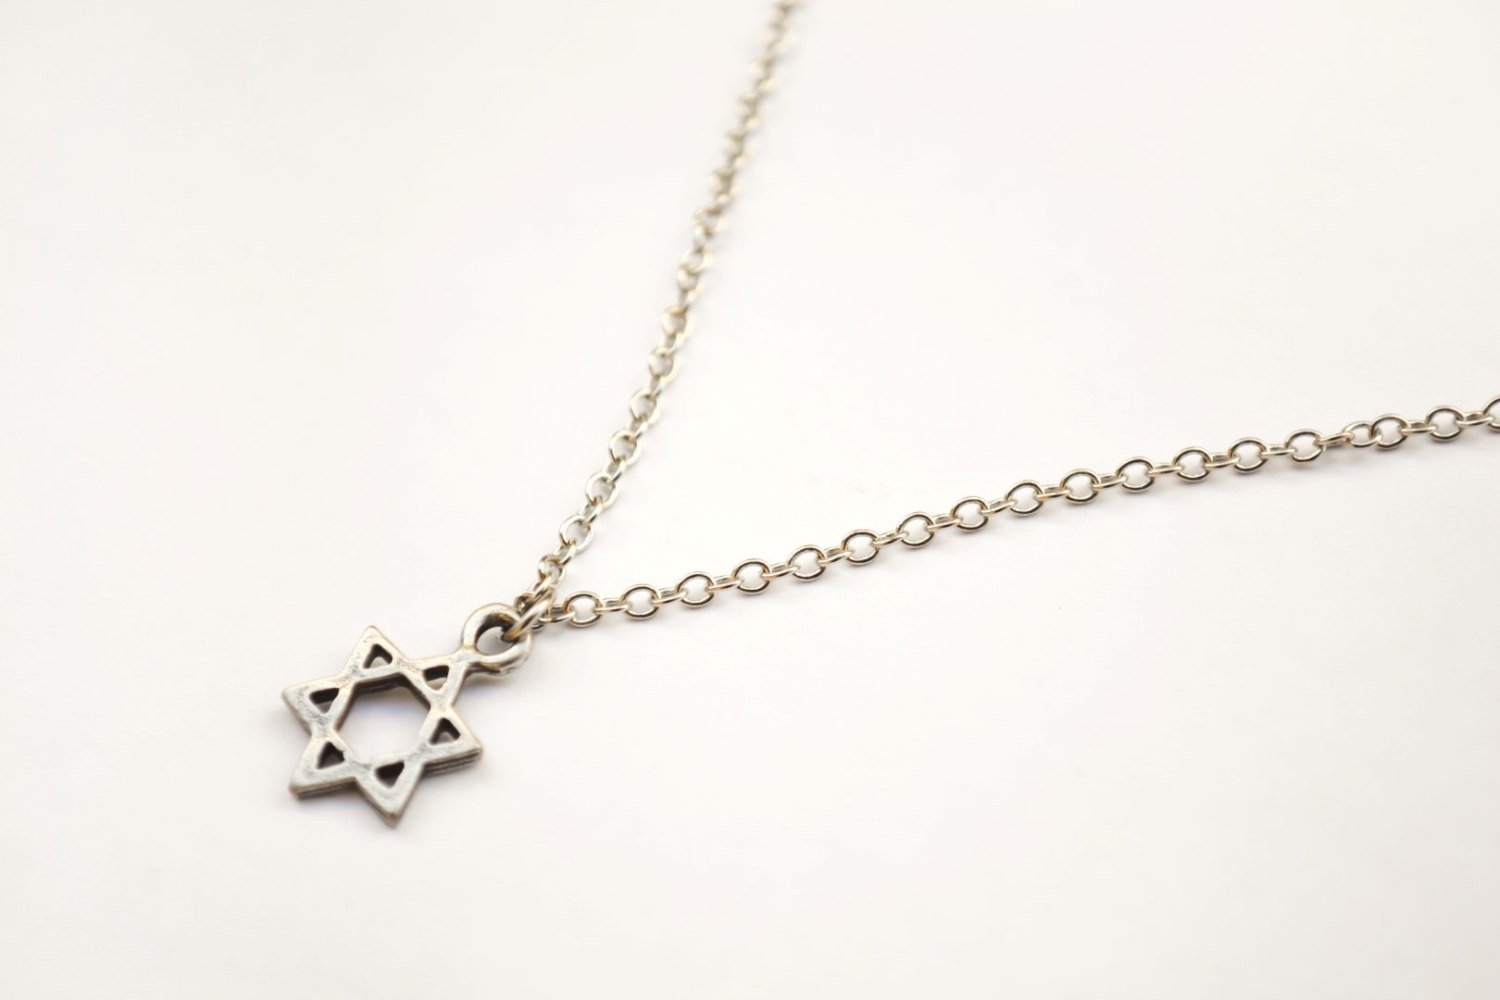 Silver Star Of David charm necklace for women, stainless steel chain - $21.00